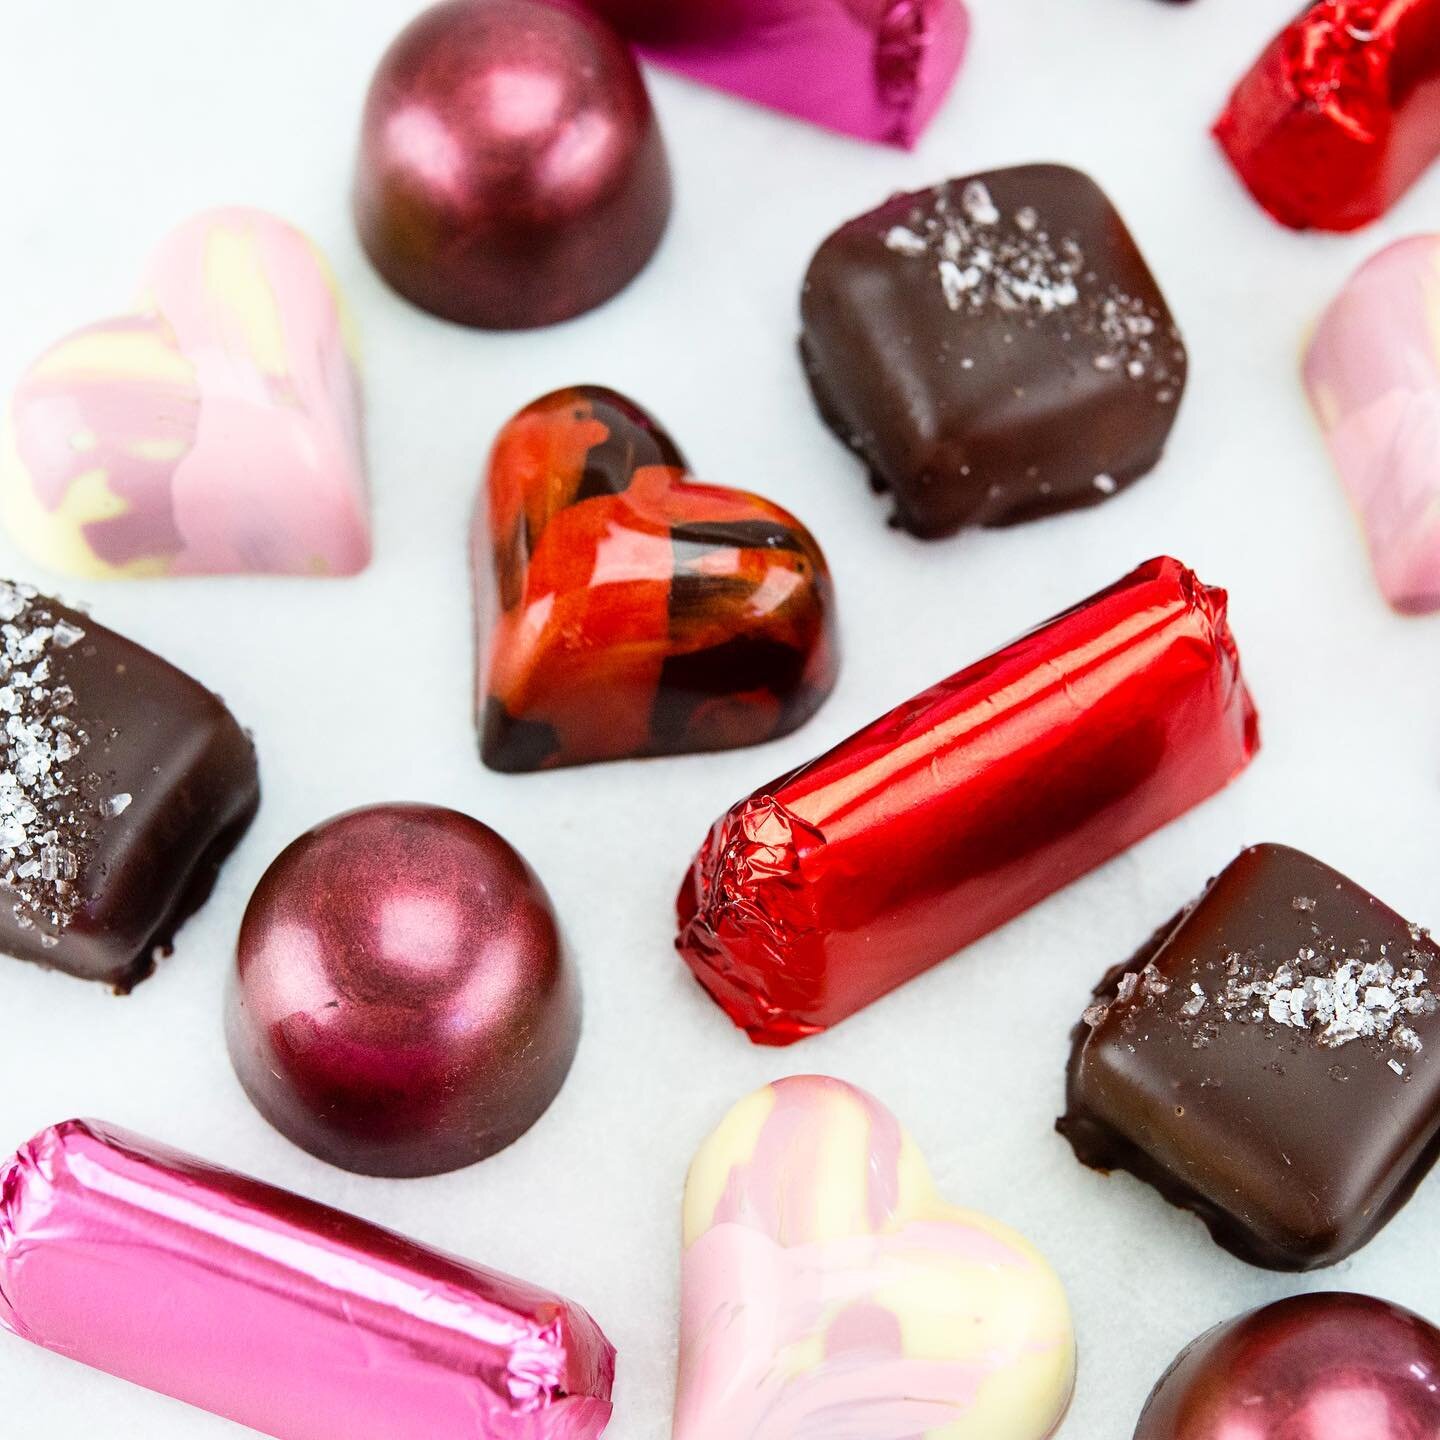 Our Valentine&rsquo;s Day Collection is full of customer favorites!  Don&rsquo;t be left empty handed&hellip;.place your order ASAP!  #lovethevalenzaway  Tag that special some for a HINT! 😉

Online Cioccolato Shop link is in our profile - local curb